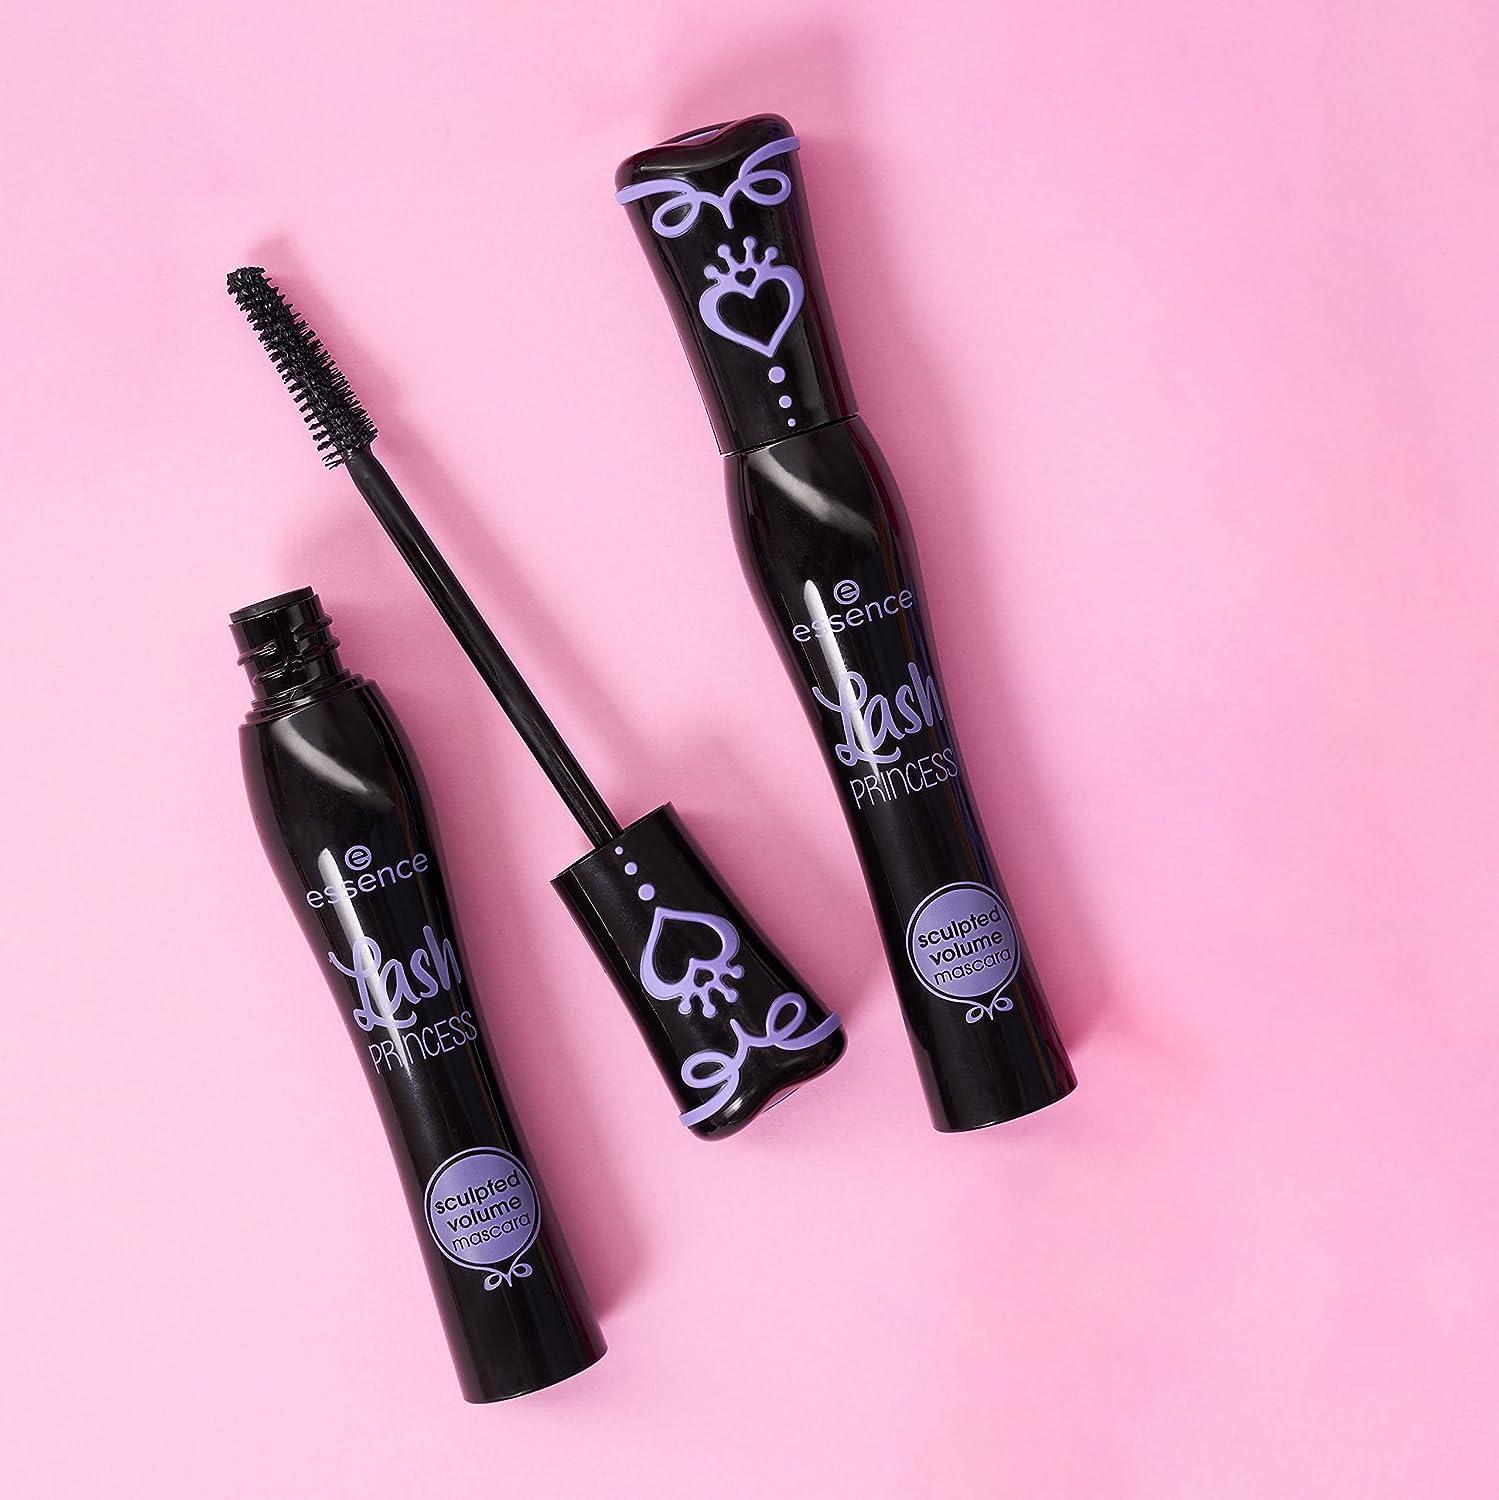 essence | Sculpted Princess Black - Free Paraben Mascara Lash 1) of (3-count) Count (Pack Free | Volume 1 | Cruelty